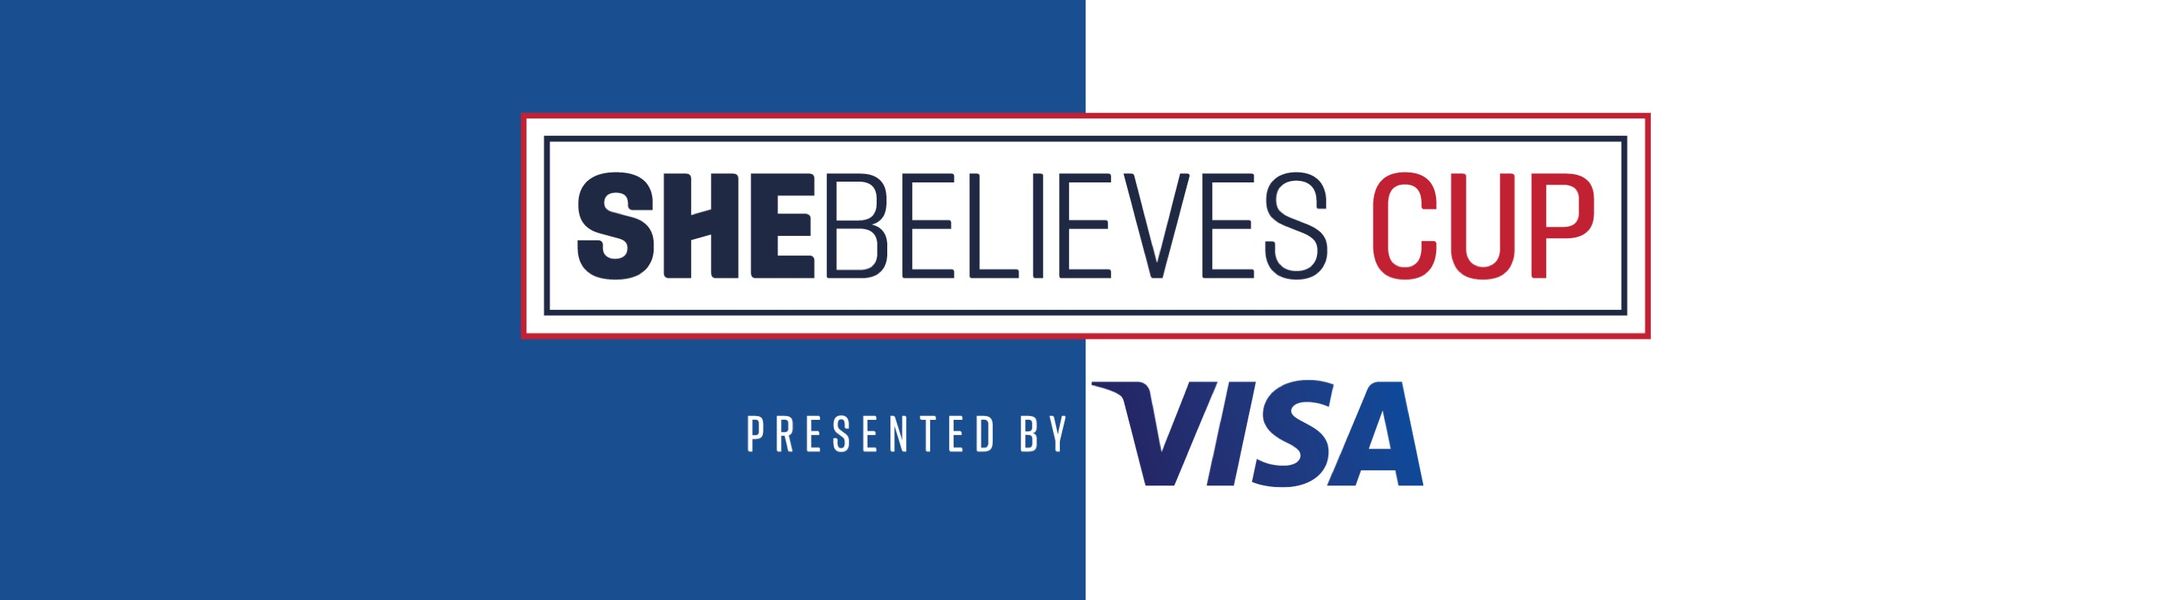 SHEBELIEVES CUP HISTORY